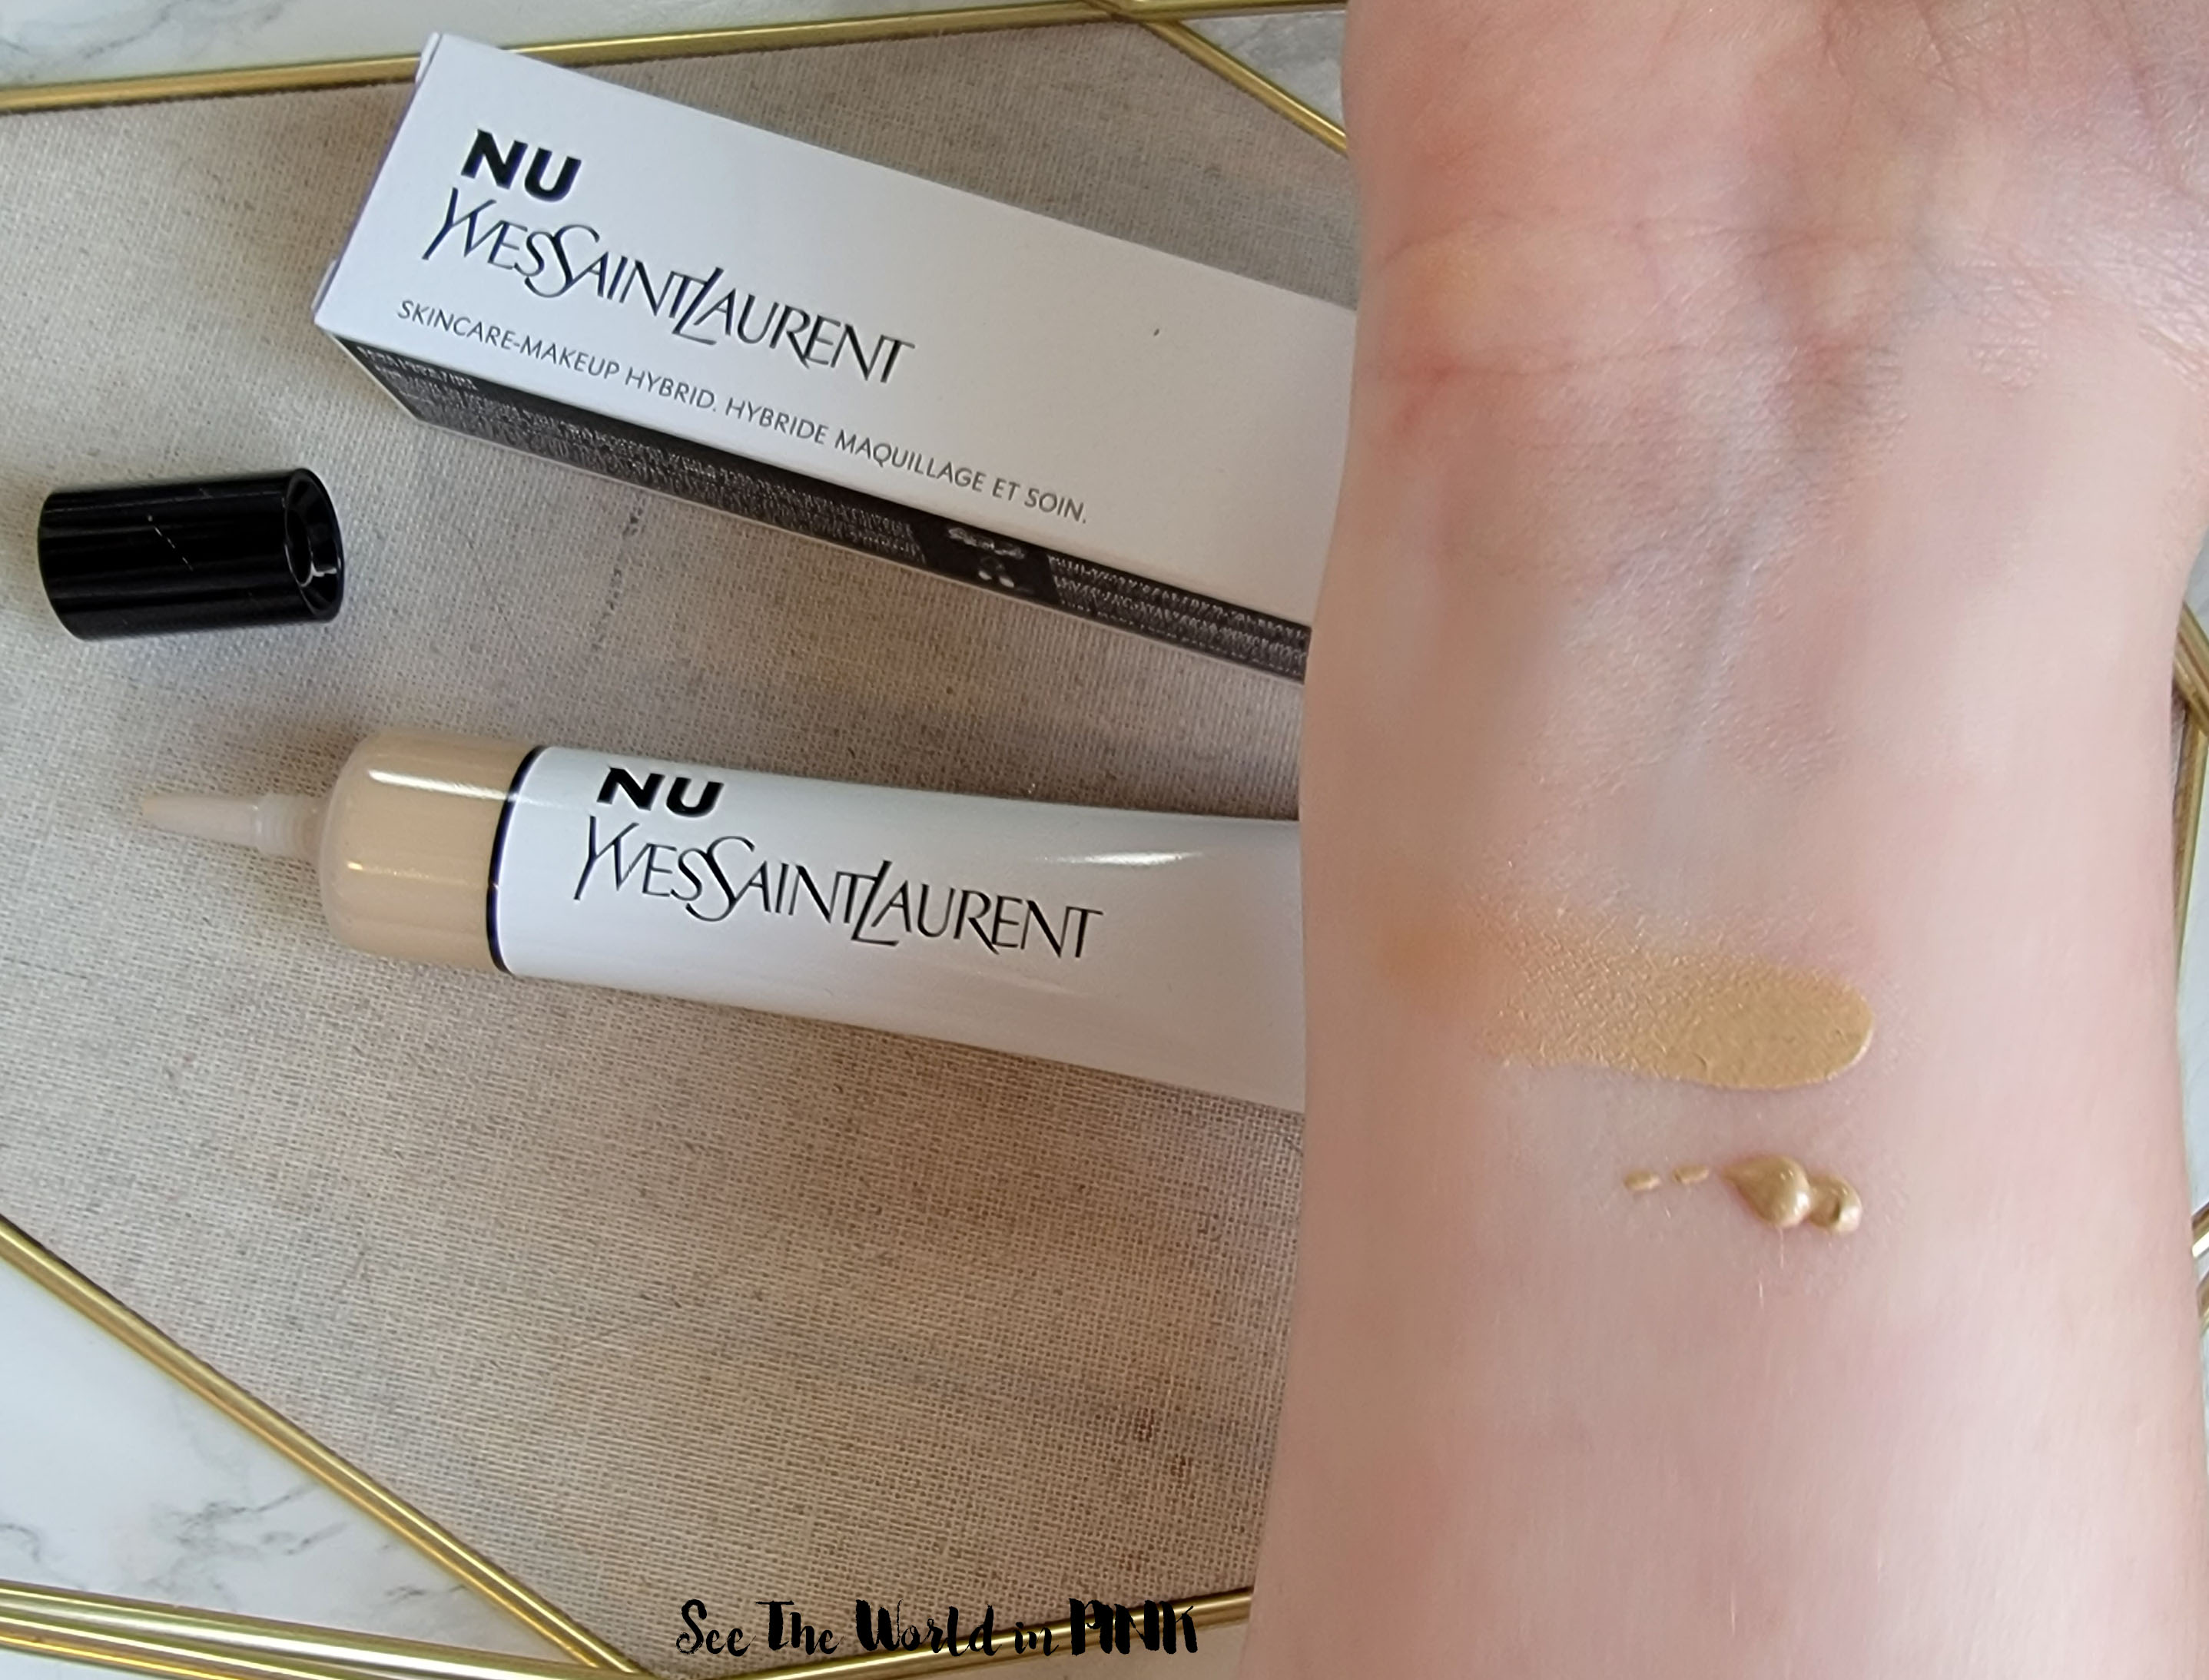 New At Shoppers Drug Mart ~ Yves Saint Laurent Nu Bare Look Tint, Milani Conceal + Perfect Undereye Brightener in Rose, Benefit Cosmetics Hoola Beach Vacay Bronzer and Blush Duo, and NYC Fat Oil Lip Drip